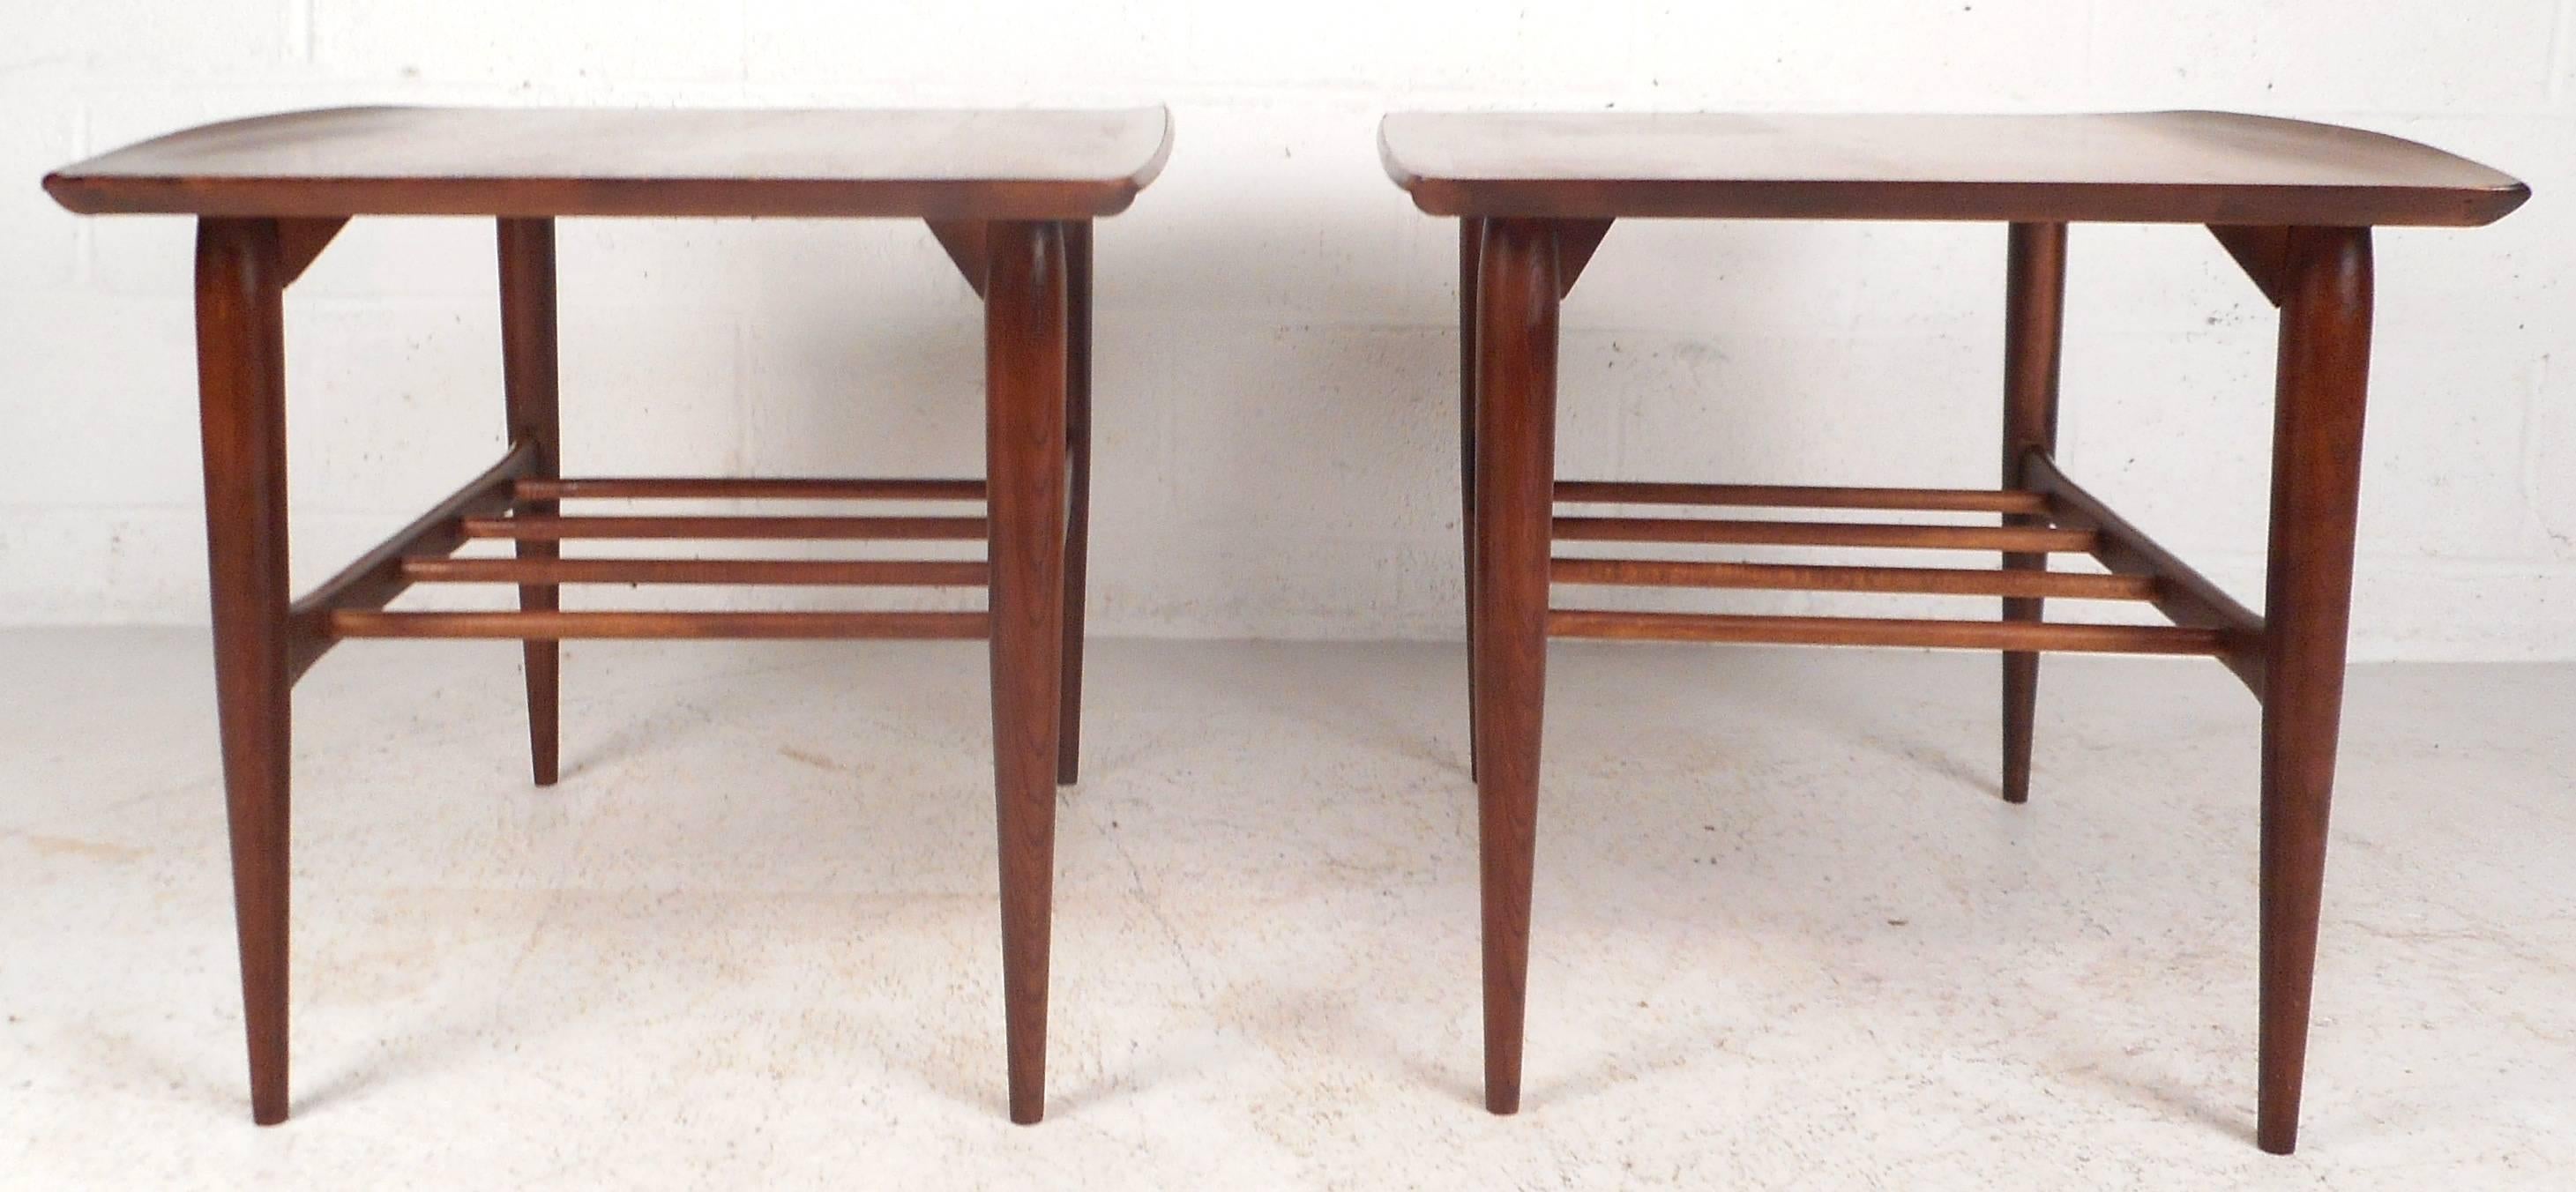 Impressive pair of vintage modern end tables feature unique raised edges, tapered legs, and a spoked second tier. Sculpted stretchers connect all four legs ensuring sturdiness without sacrificing style. Quality craftsmanship by Bassett Furniture